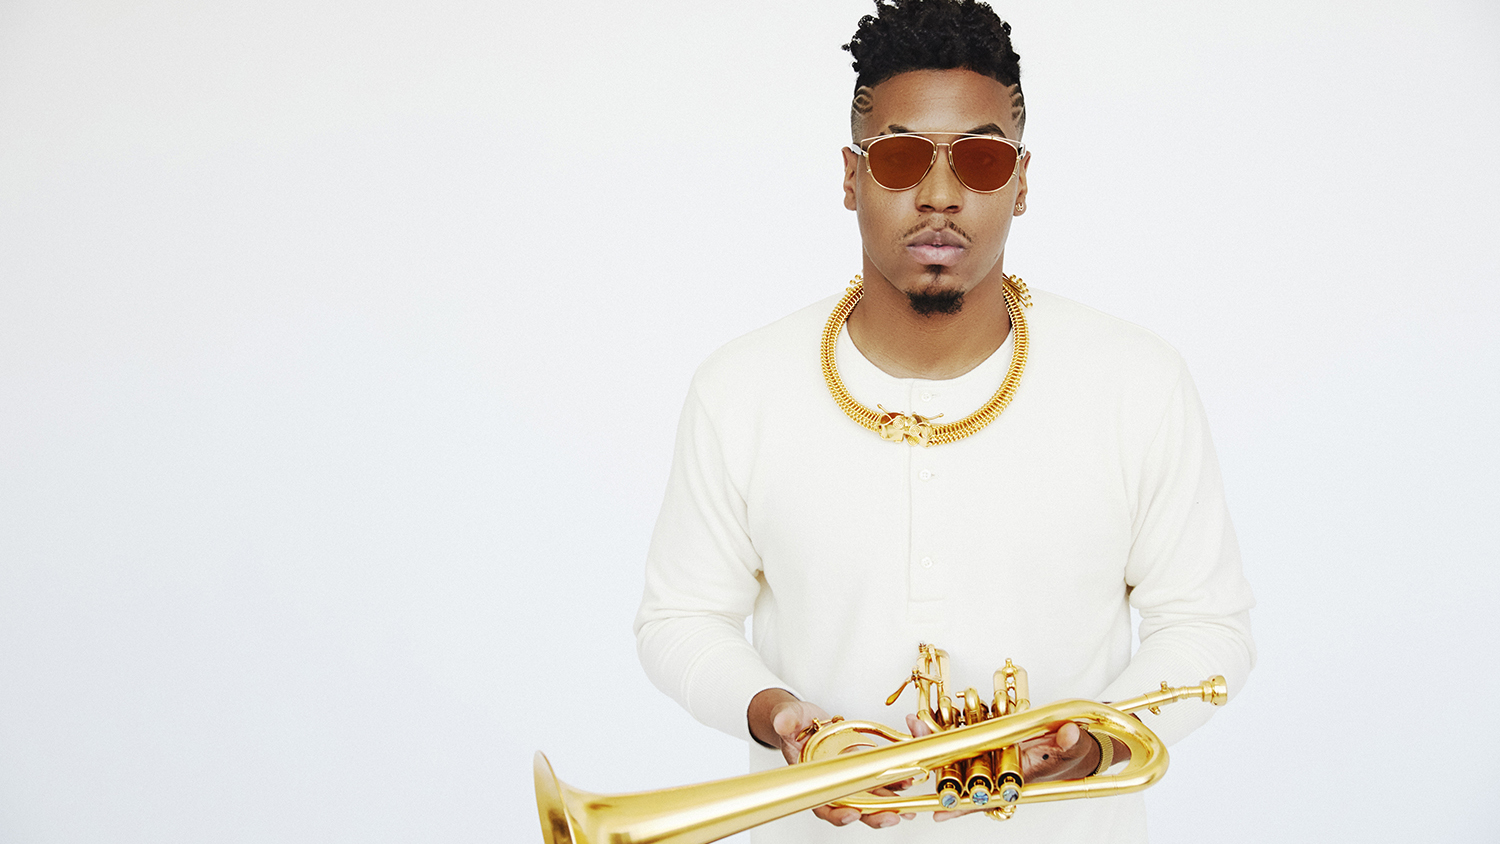 Christian Scott Moves Jazz Forward While Honoring the Past